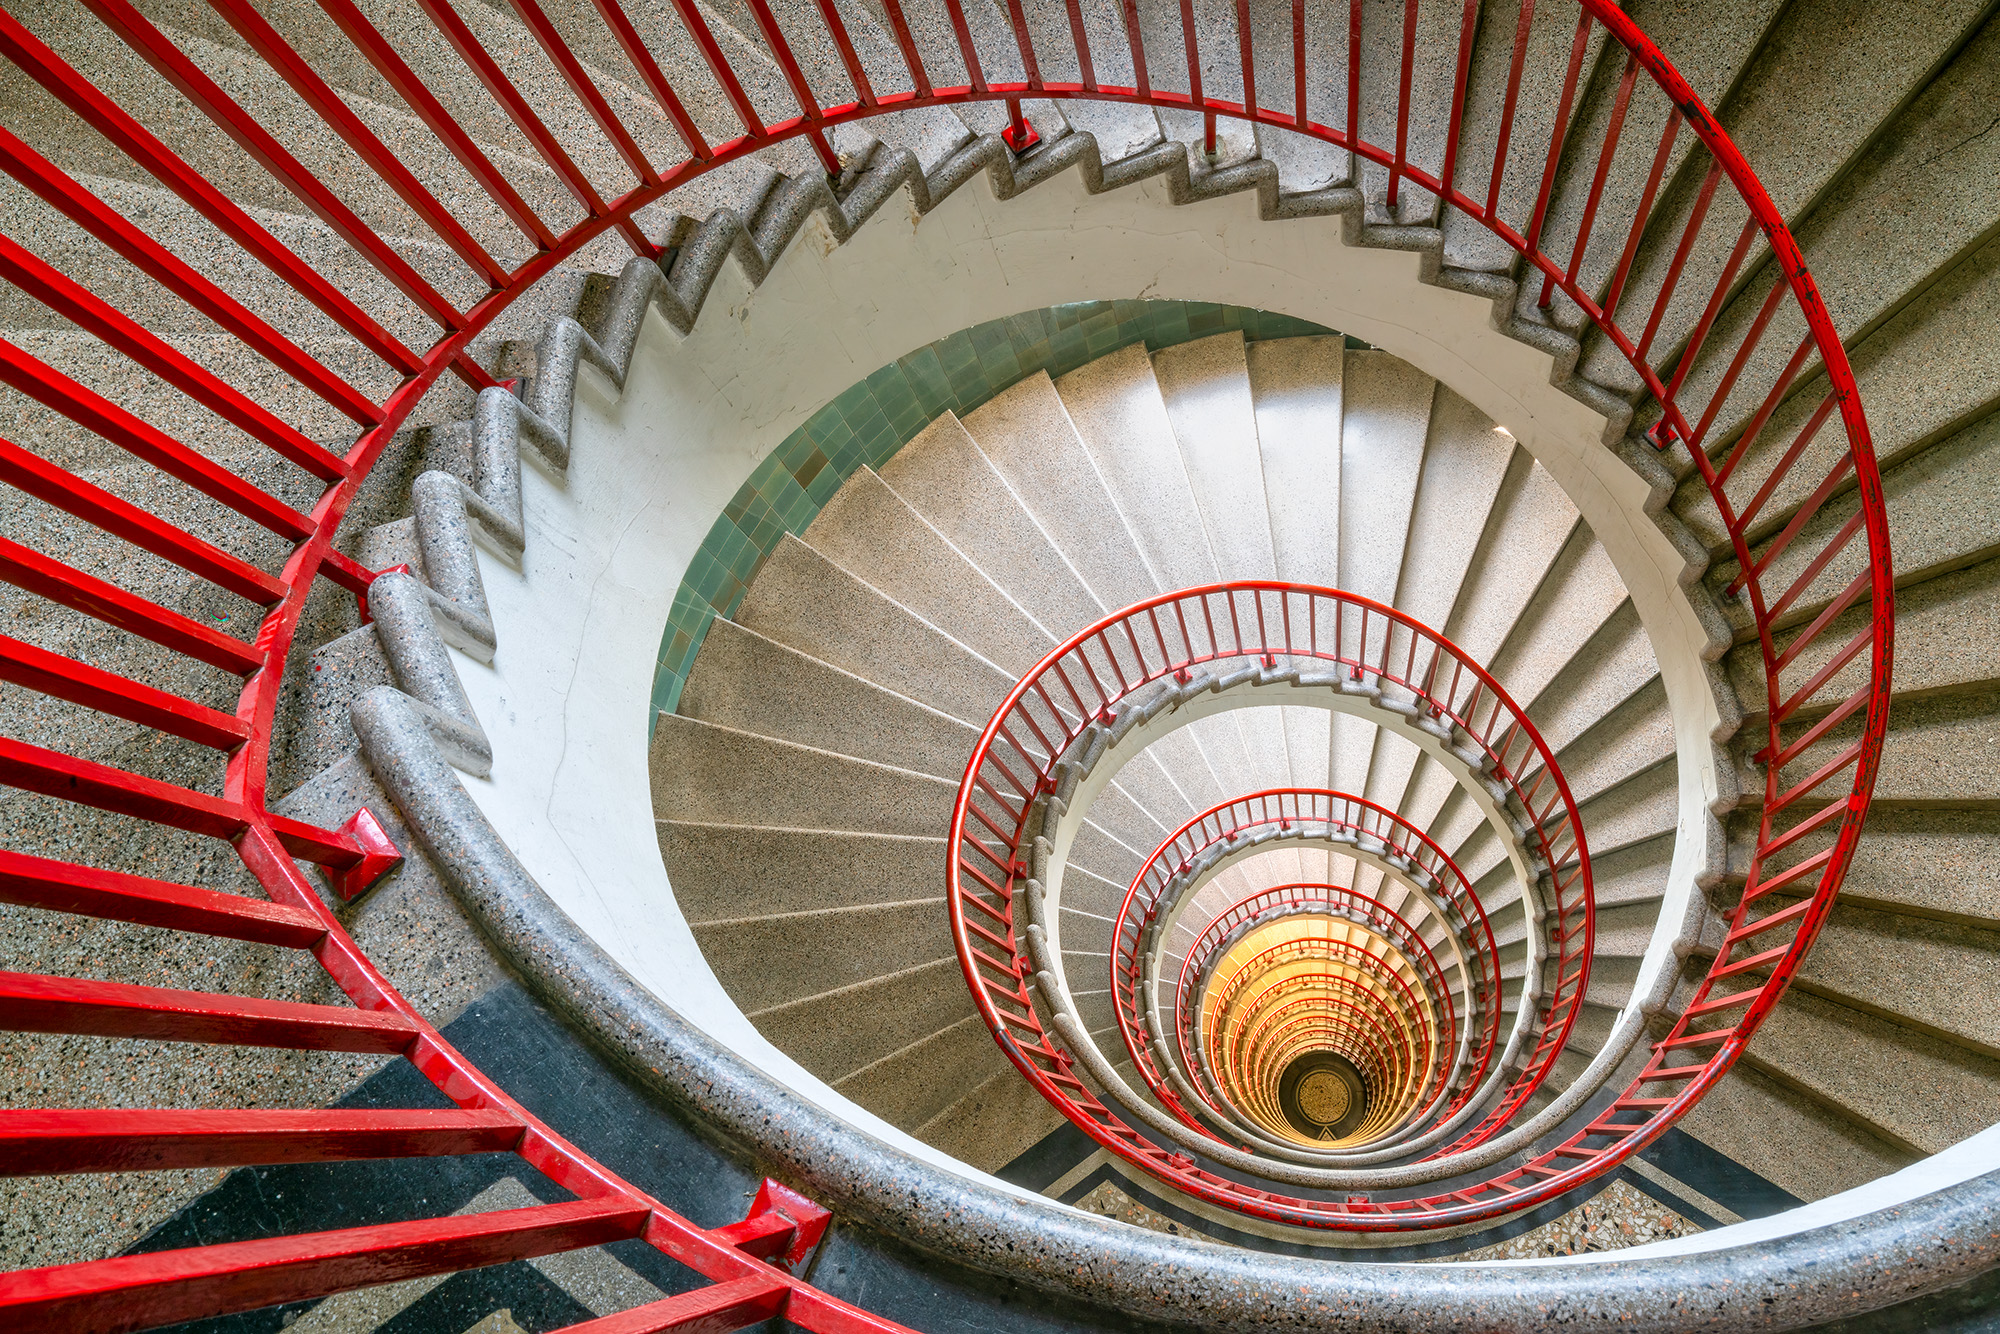 Prior to my arrival in Ljubljana, I scoured the internet for photography spots, and a spiral staircase in an early 20th-century...